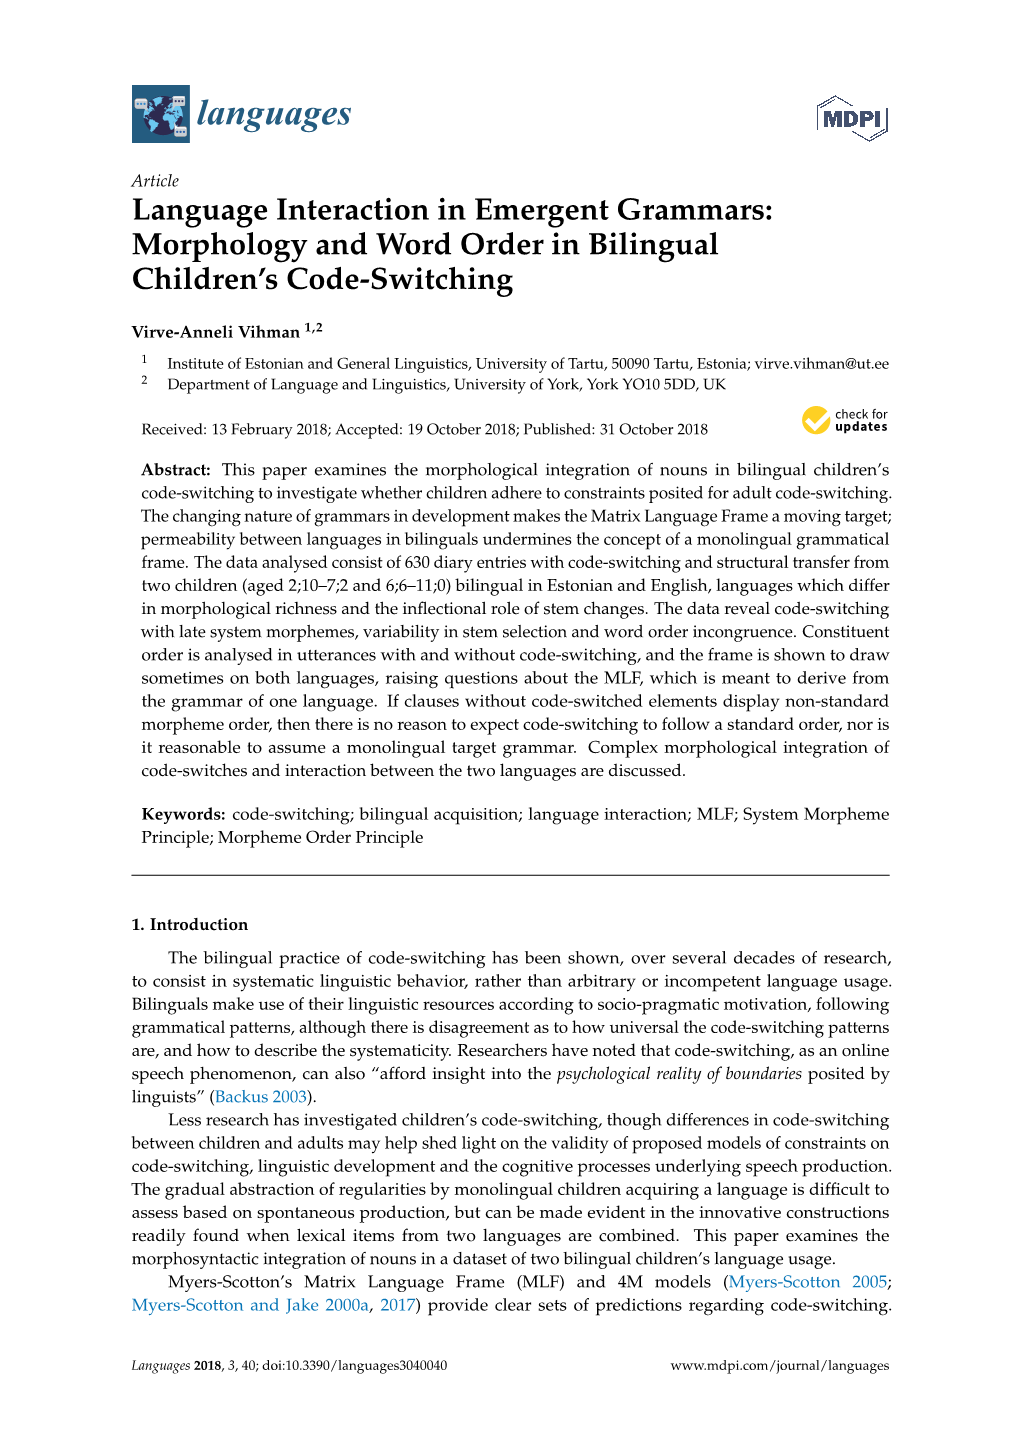 Language Interaction in Emergent Grammars: Morphology and Word Order in Bilingual Children’S Code-Switching